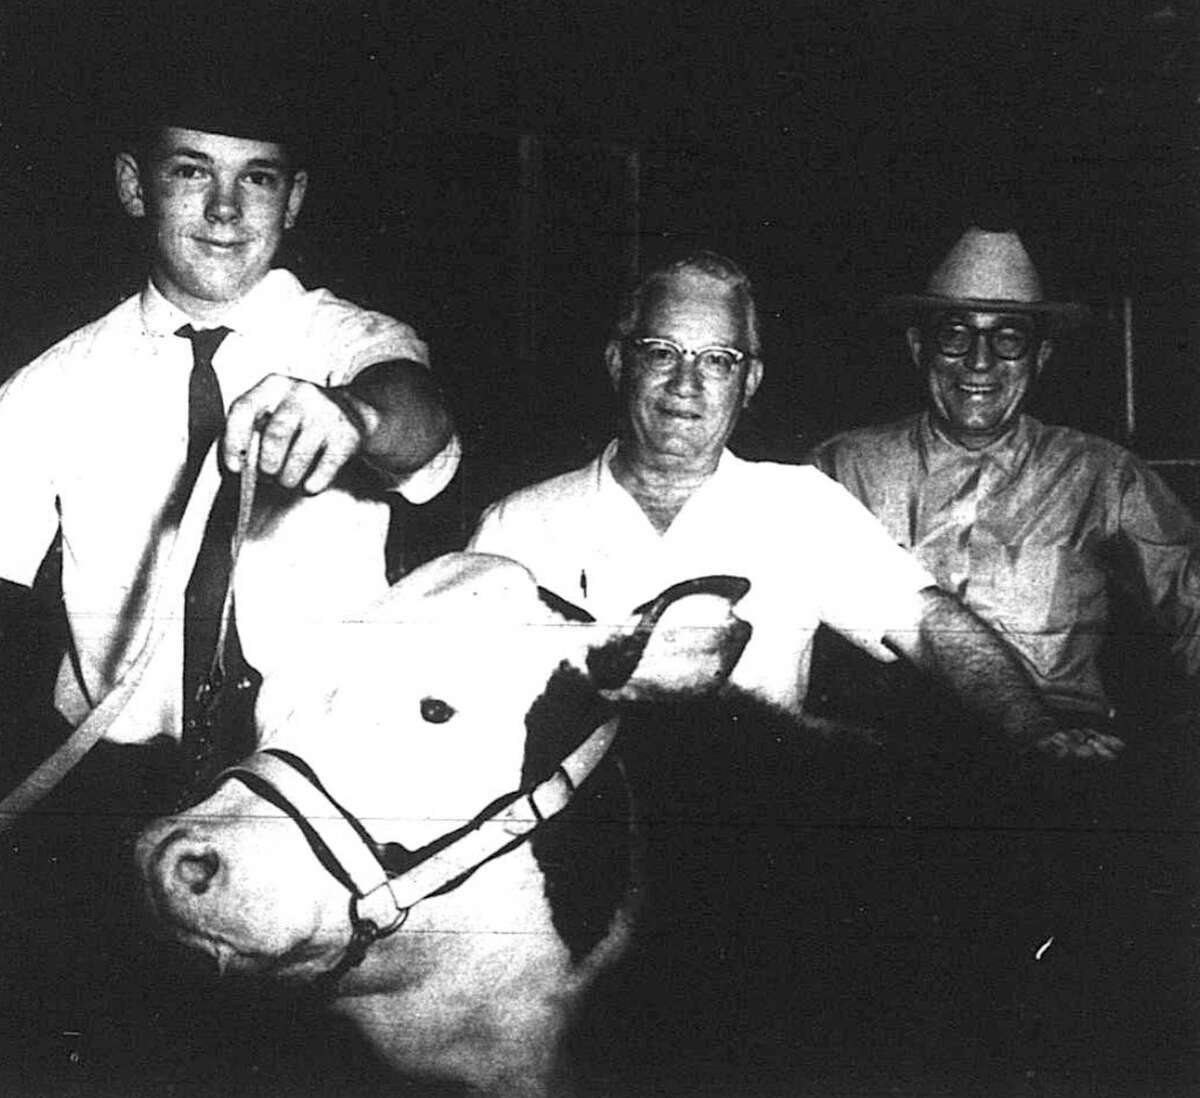 Pictured are R. D. Simonton and Frank Powell representing the Conroe National Bank, with "Jake" the Grand Champion Steer of the 1965 Junior Livestock Show at Cow Palace. He was shown by Martin Weldon of Willis FFA. The steer brought in a record over the previous year.